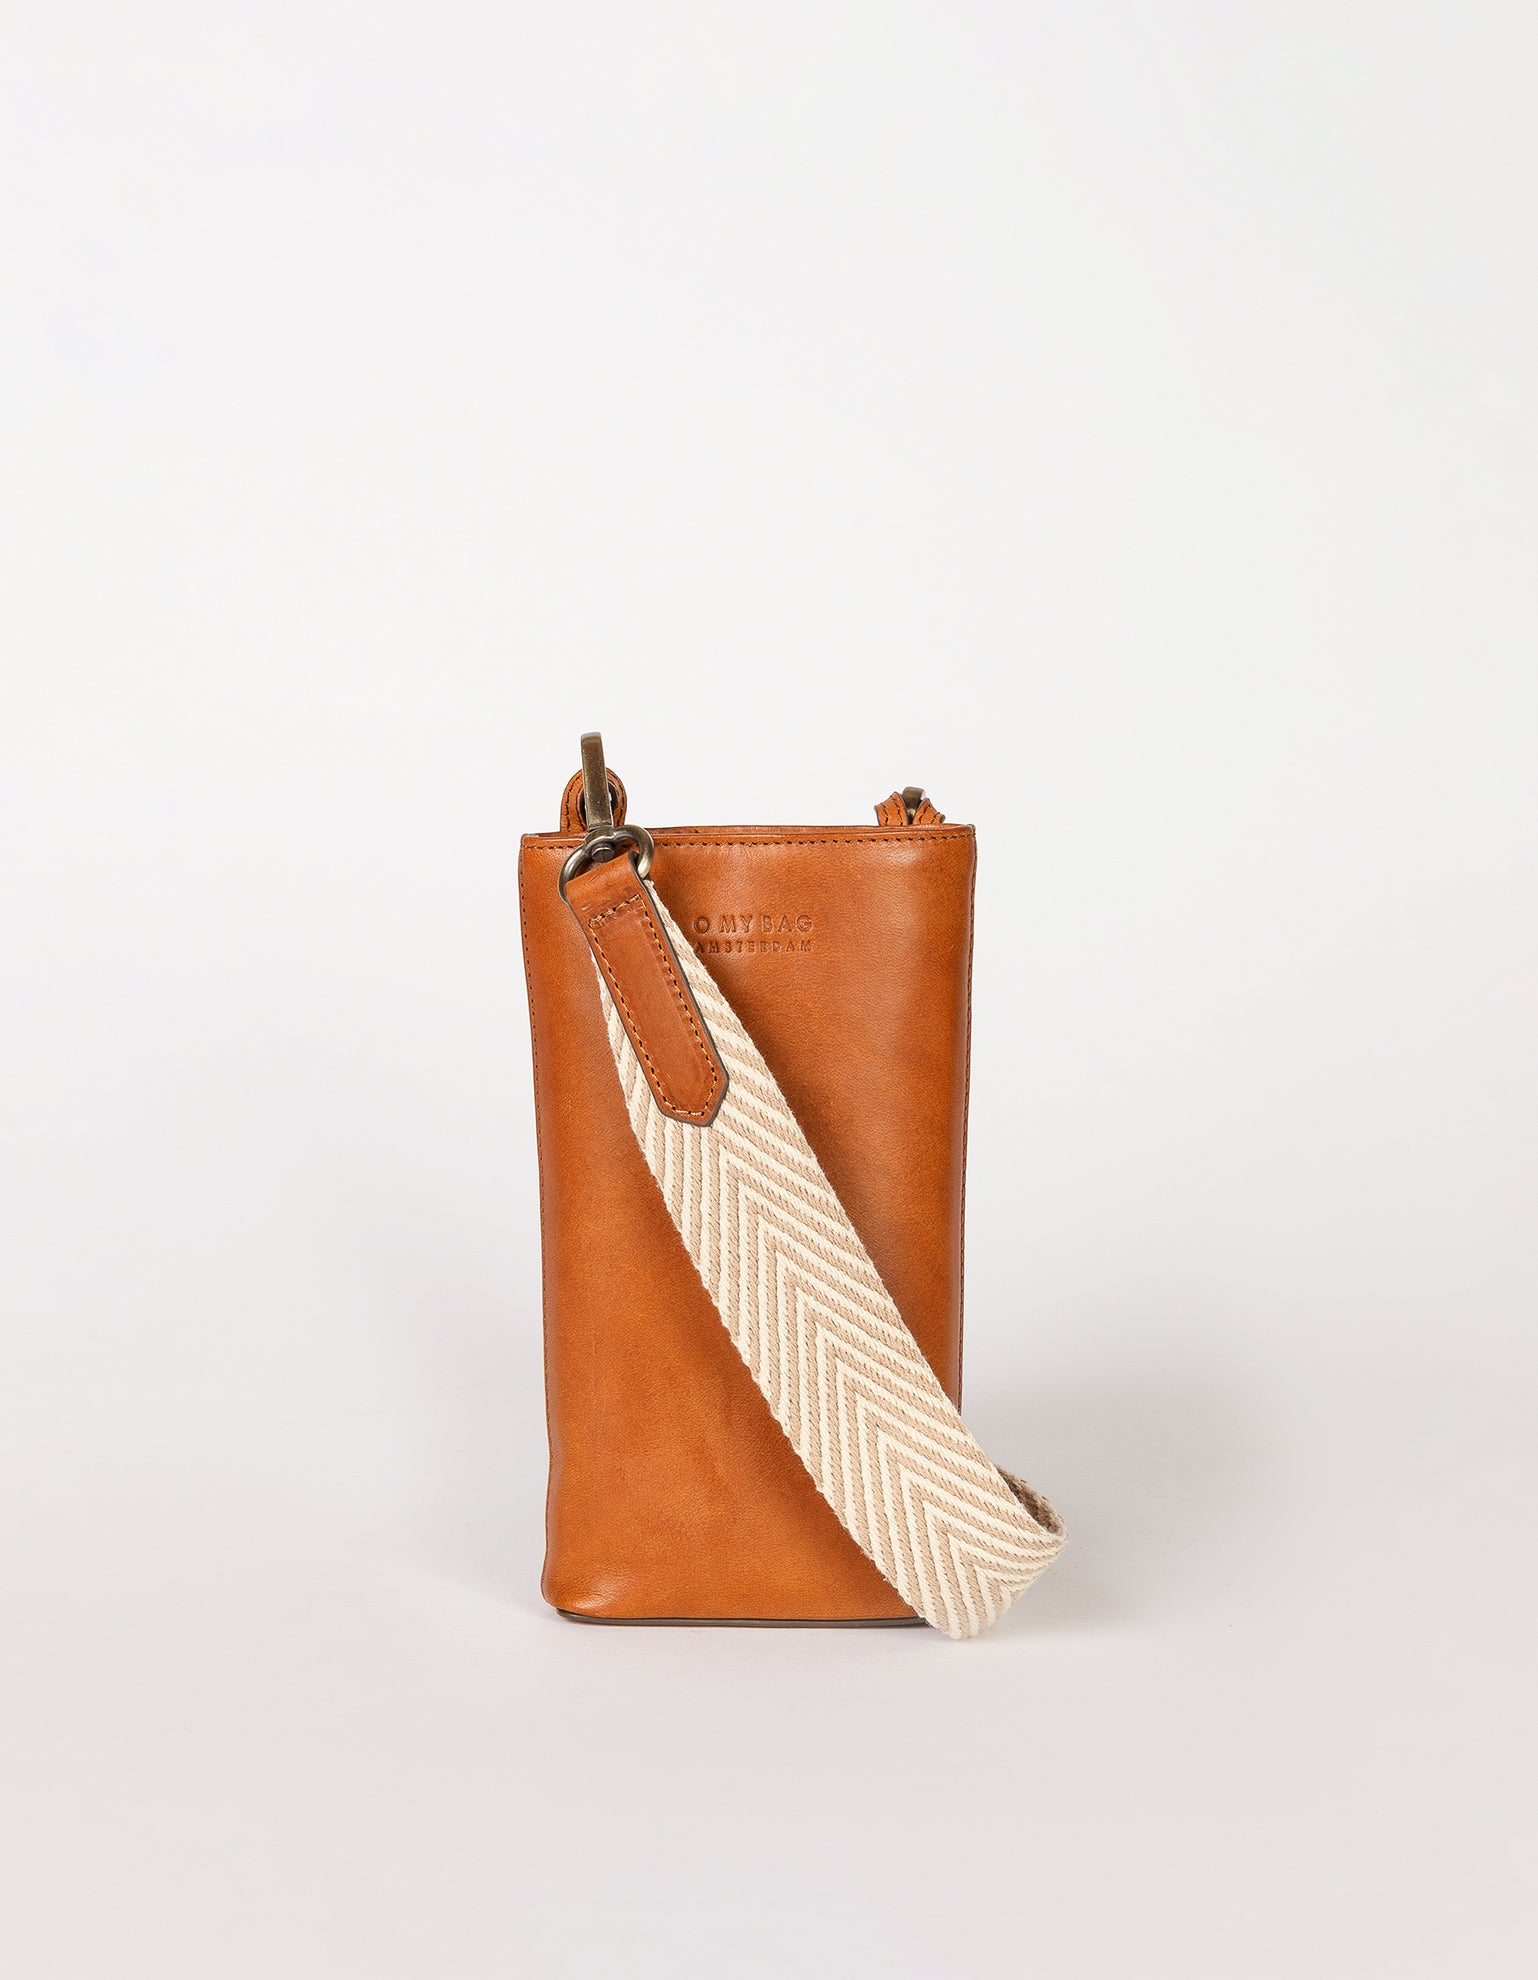 Charlie phone bag - cognac classic leather - product image with webbing strap